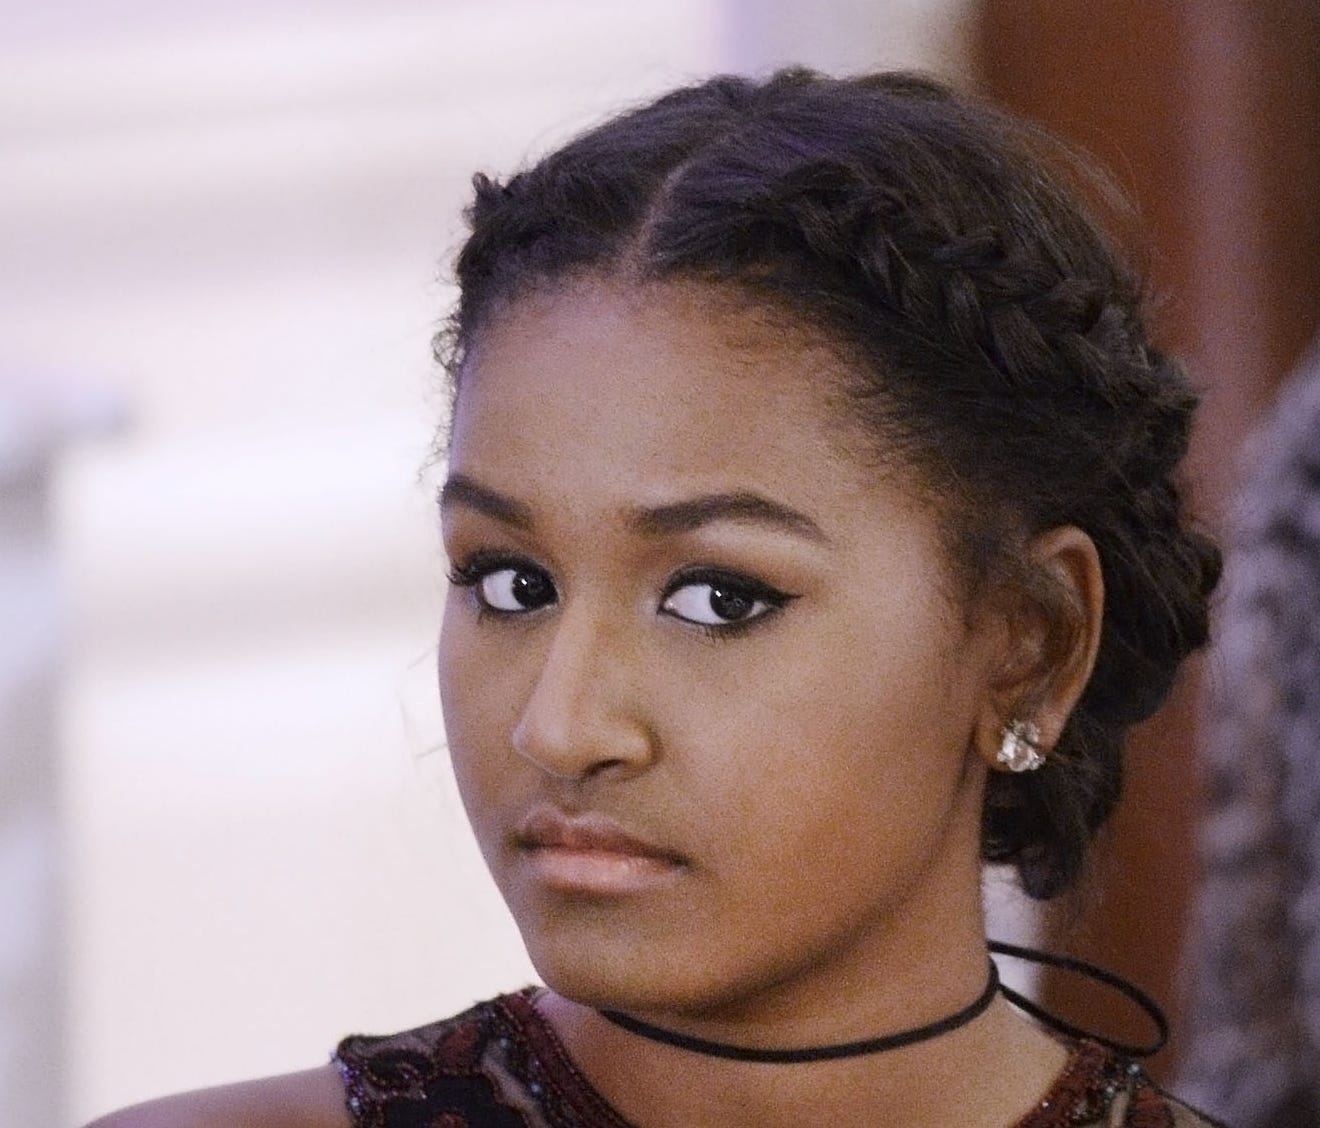 Sasha Obama attends a State Dinner at the White House on March 10, 2016.